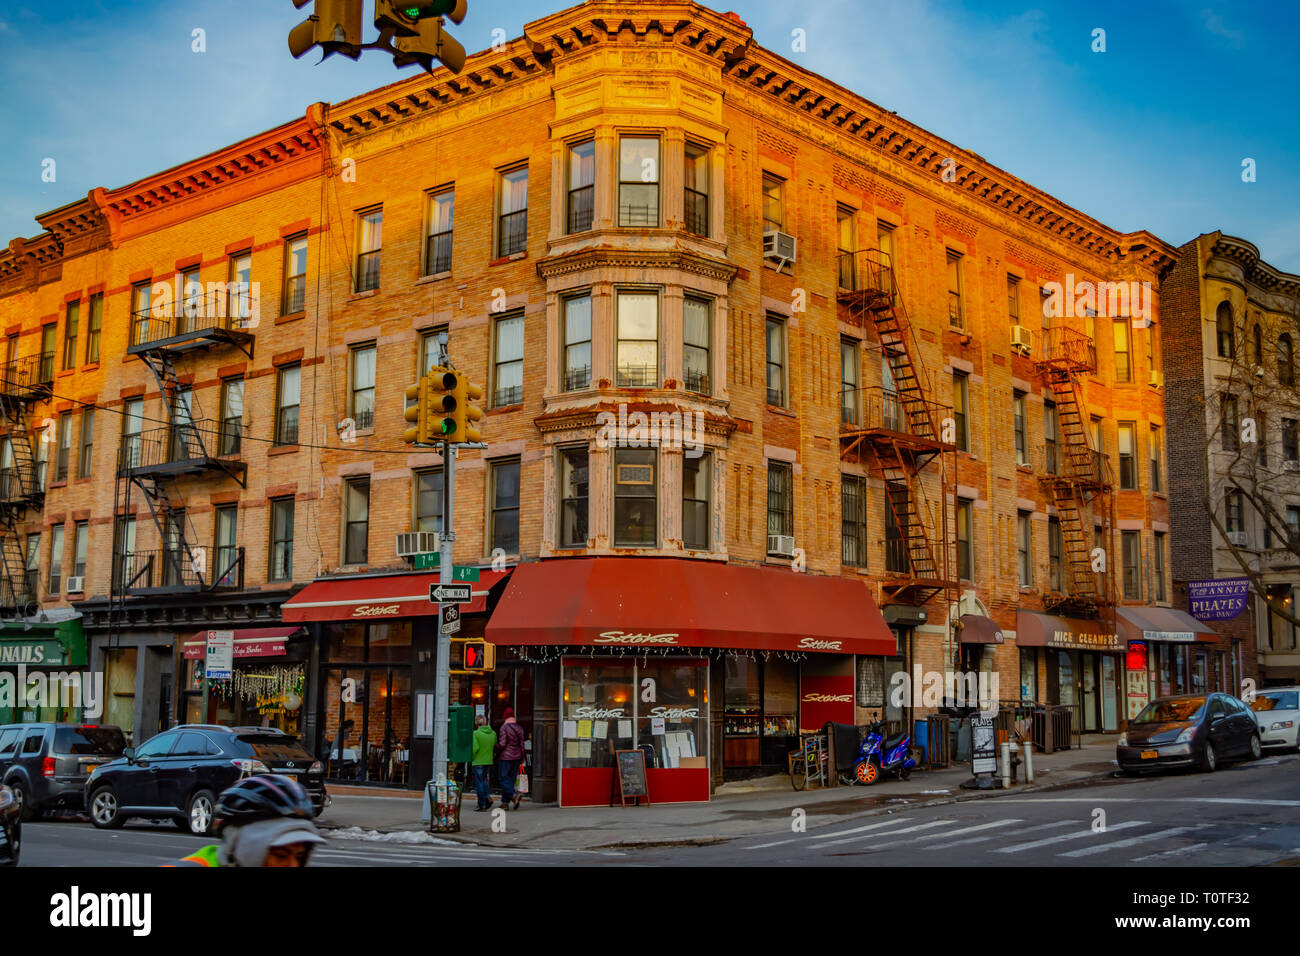 Beautiful colonial apartment buildings in the Park Slope neighborhood in Brooklyn, New York, Spring 2019 Stock Photo